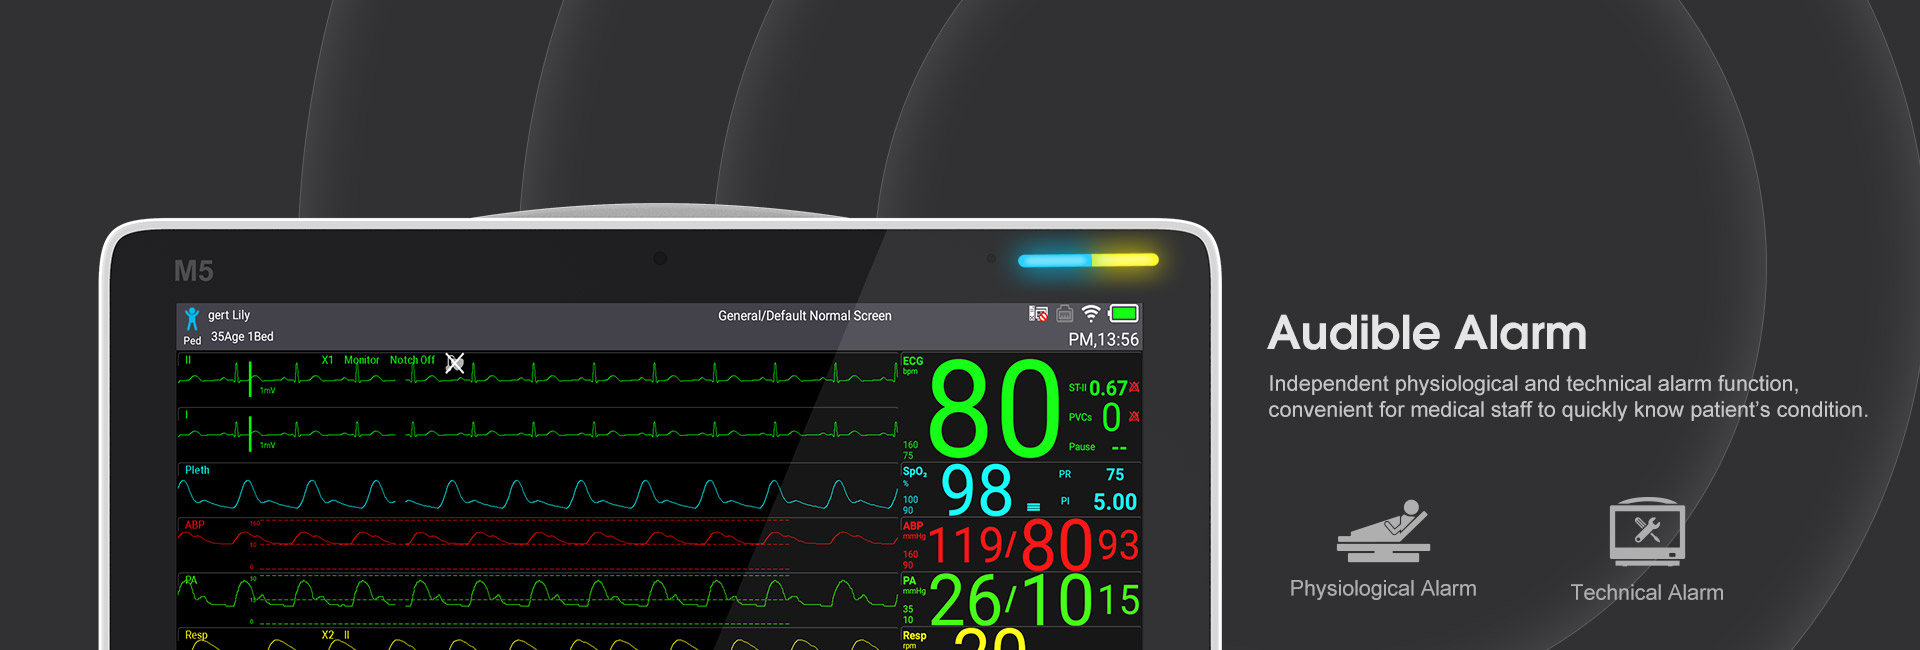 AcuitSign M5 15 Touch Screen Patient Monitor(图4)